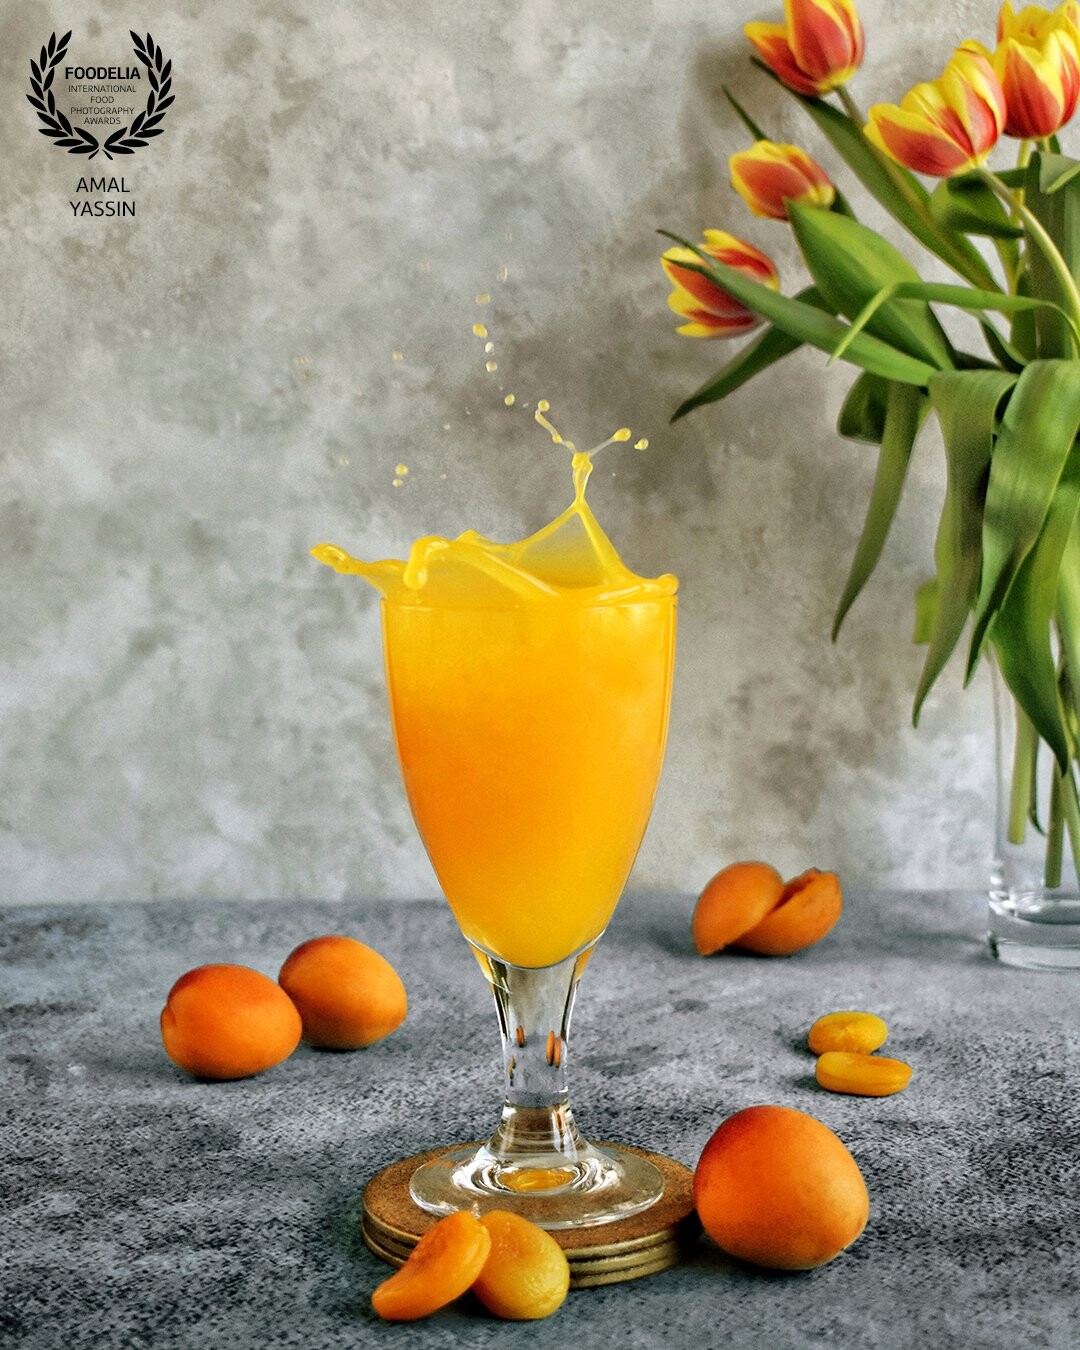 This photo is very special to me as it was my first attempt at splash photography! I used natural light to capture this delicious drink. It's a famous Middle Eastern drink called (Qamar Al-Deen) which is made from dried apricot paste.